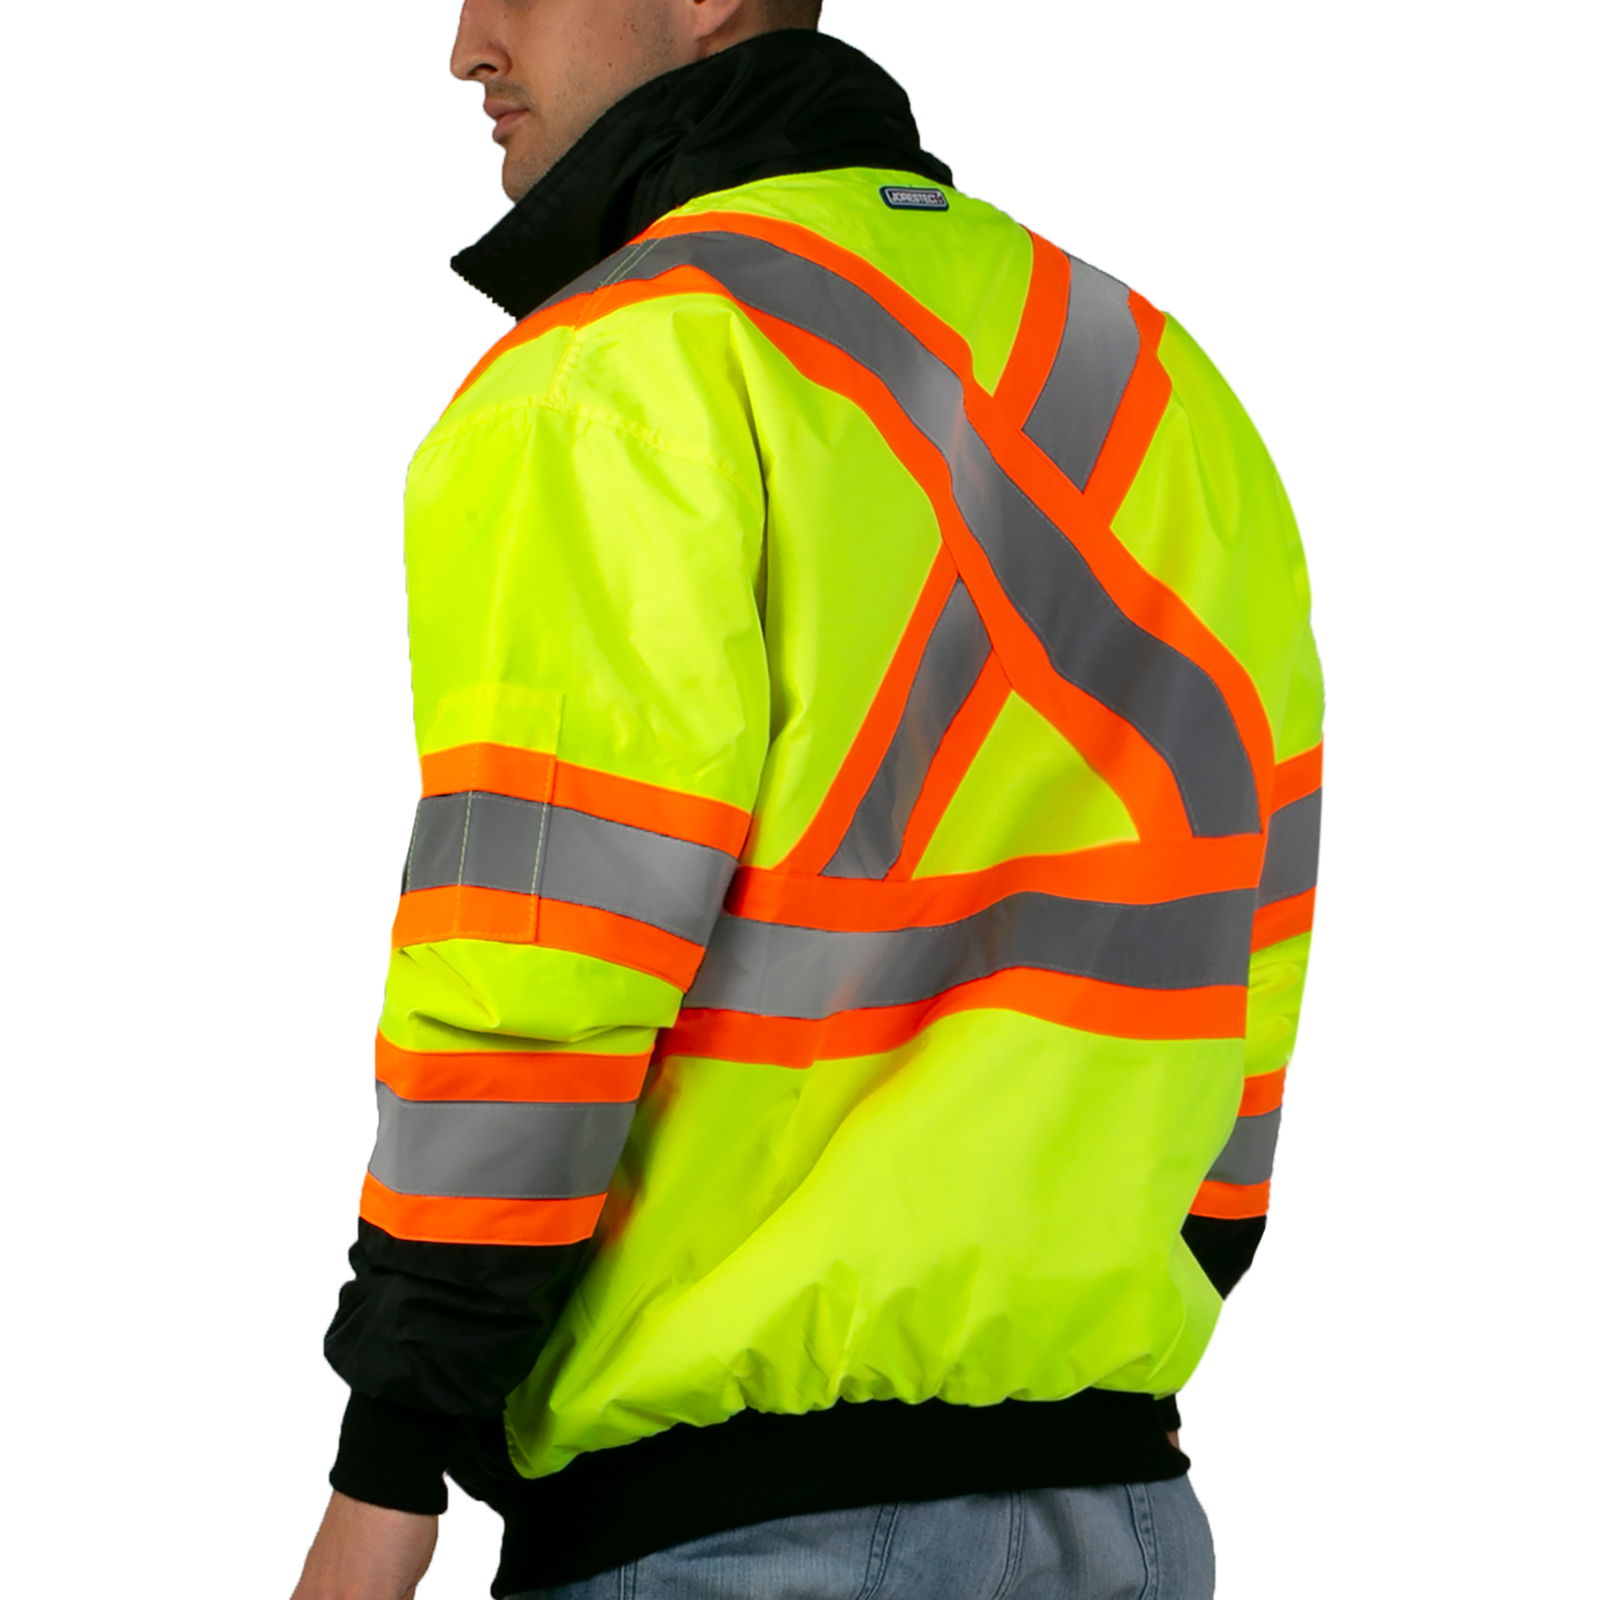 Man wearing the yellow JORESTECH Hi-vis two tone insulated safety bomber jacket with reflective stripes and a reflective X on the back